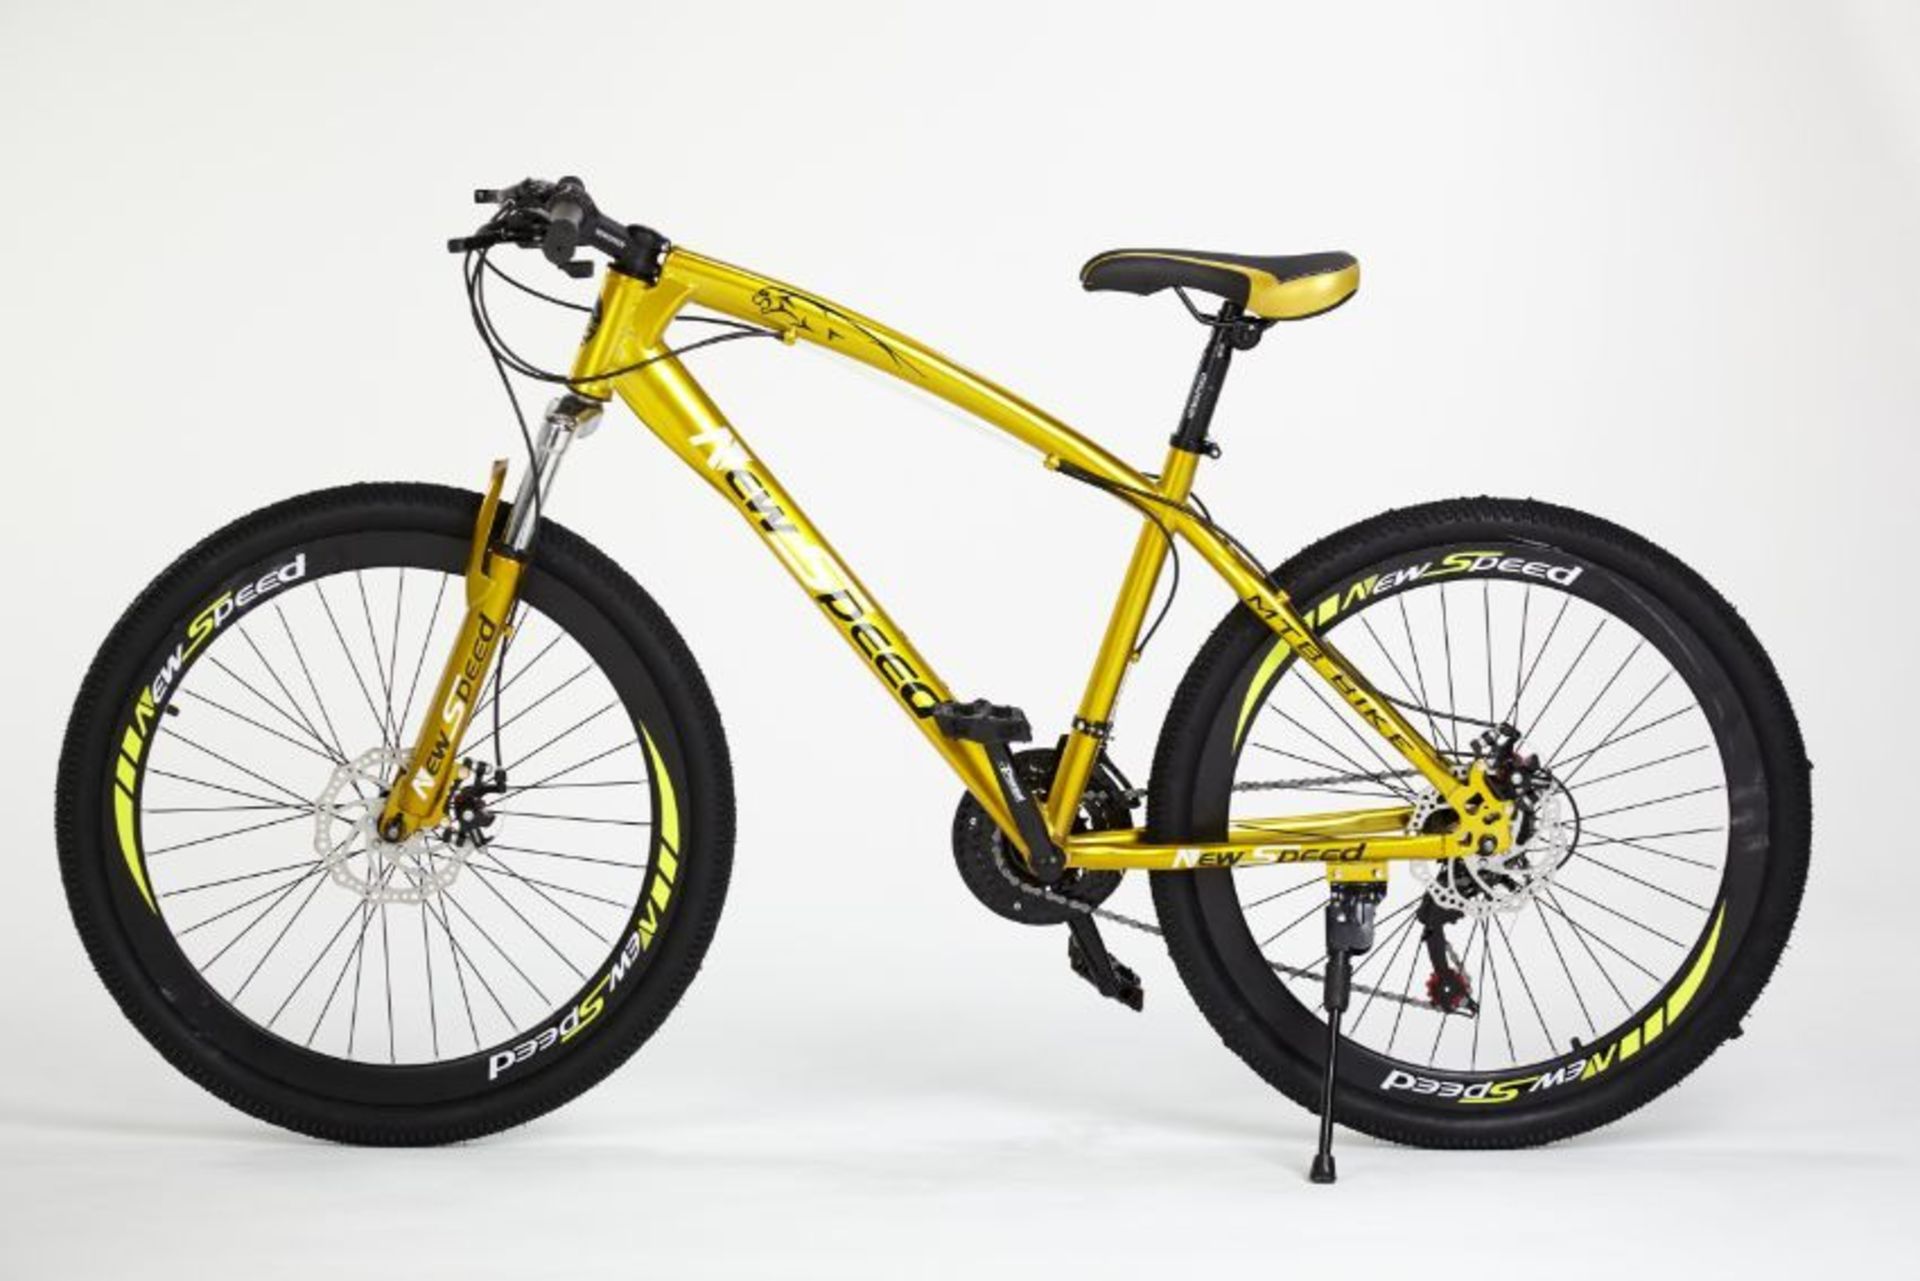 JOB LOT 5 X BRAND NEW NEW SPEED 21 GEARS STUNNING SUSPENSION GOLD COLOURED MOUNTAIN BIKE - Image 9 of 11